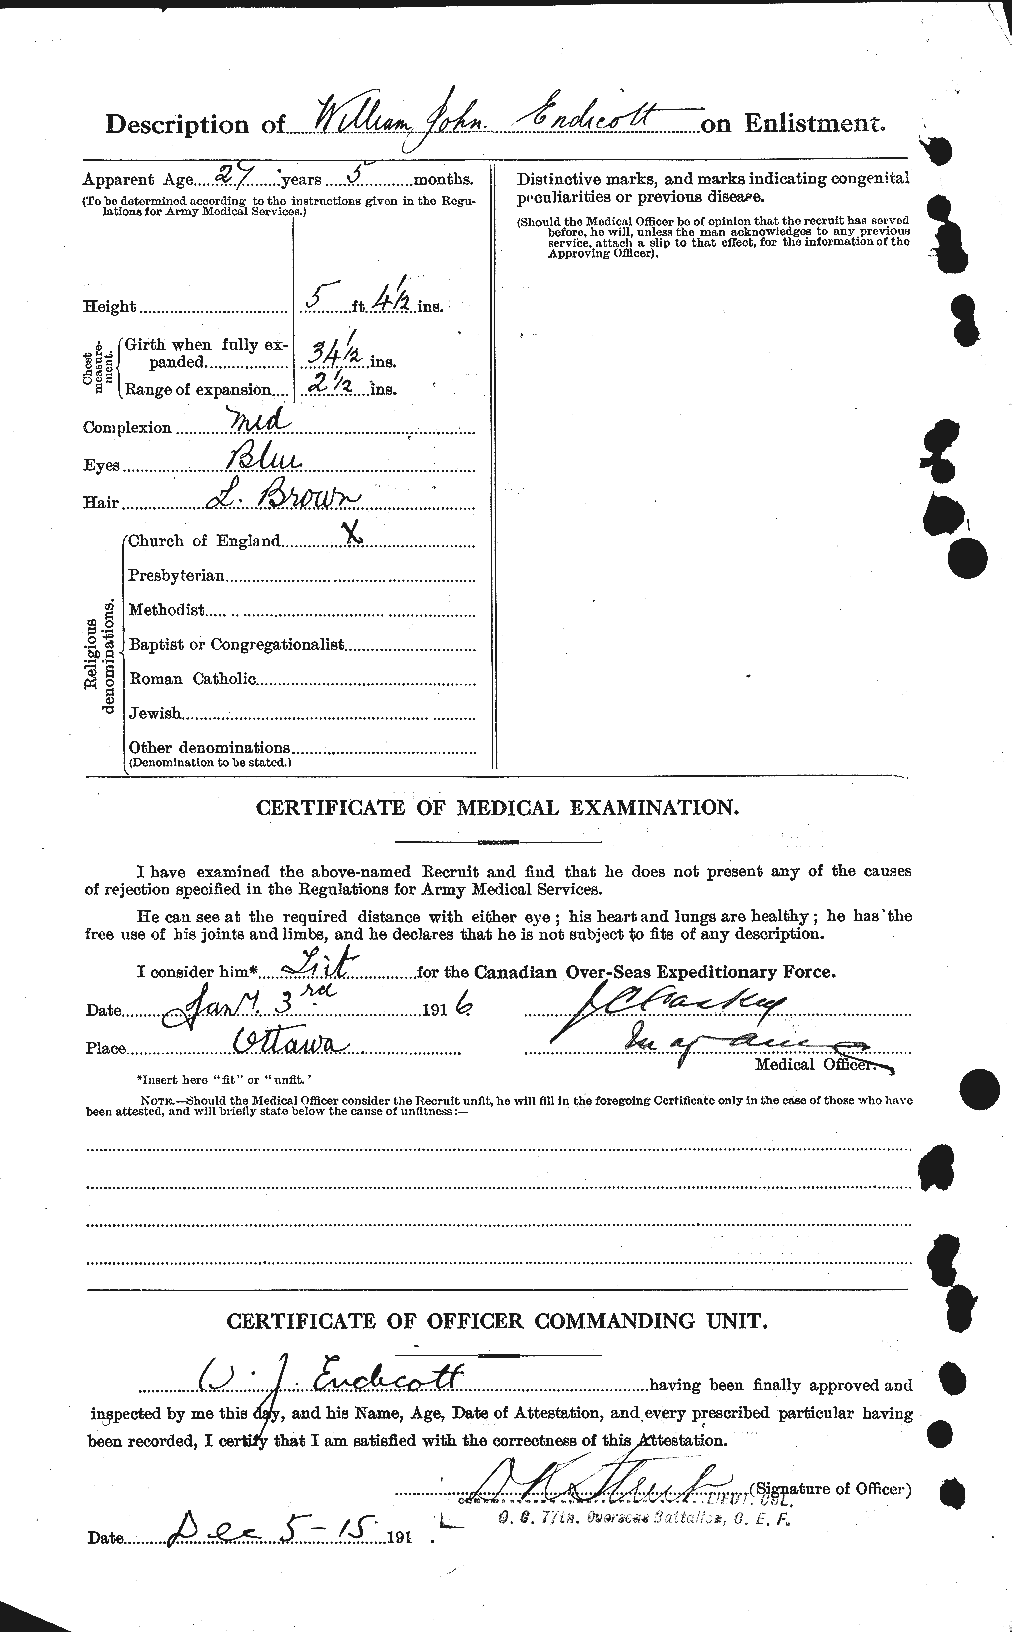 Personnel Records of the First World War - CEF 313925b